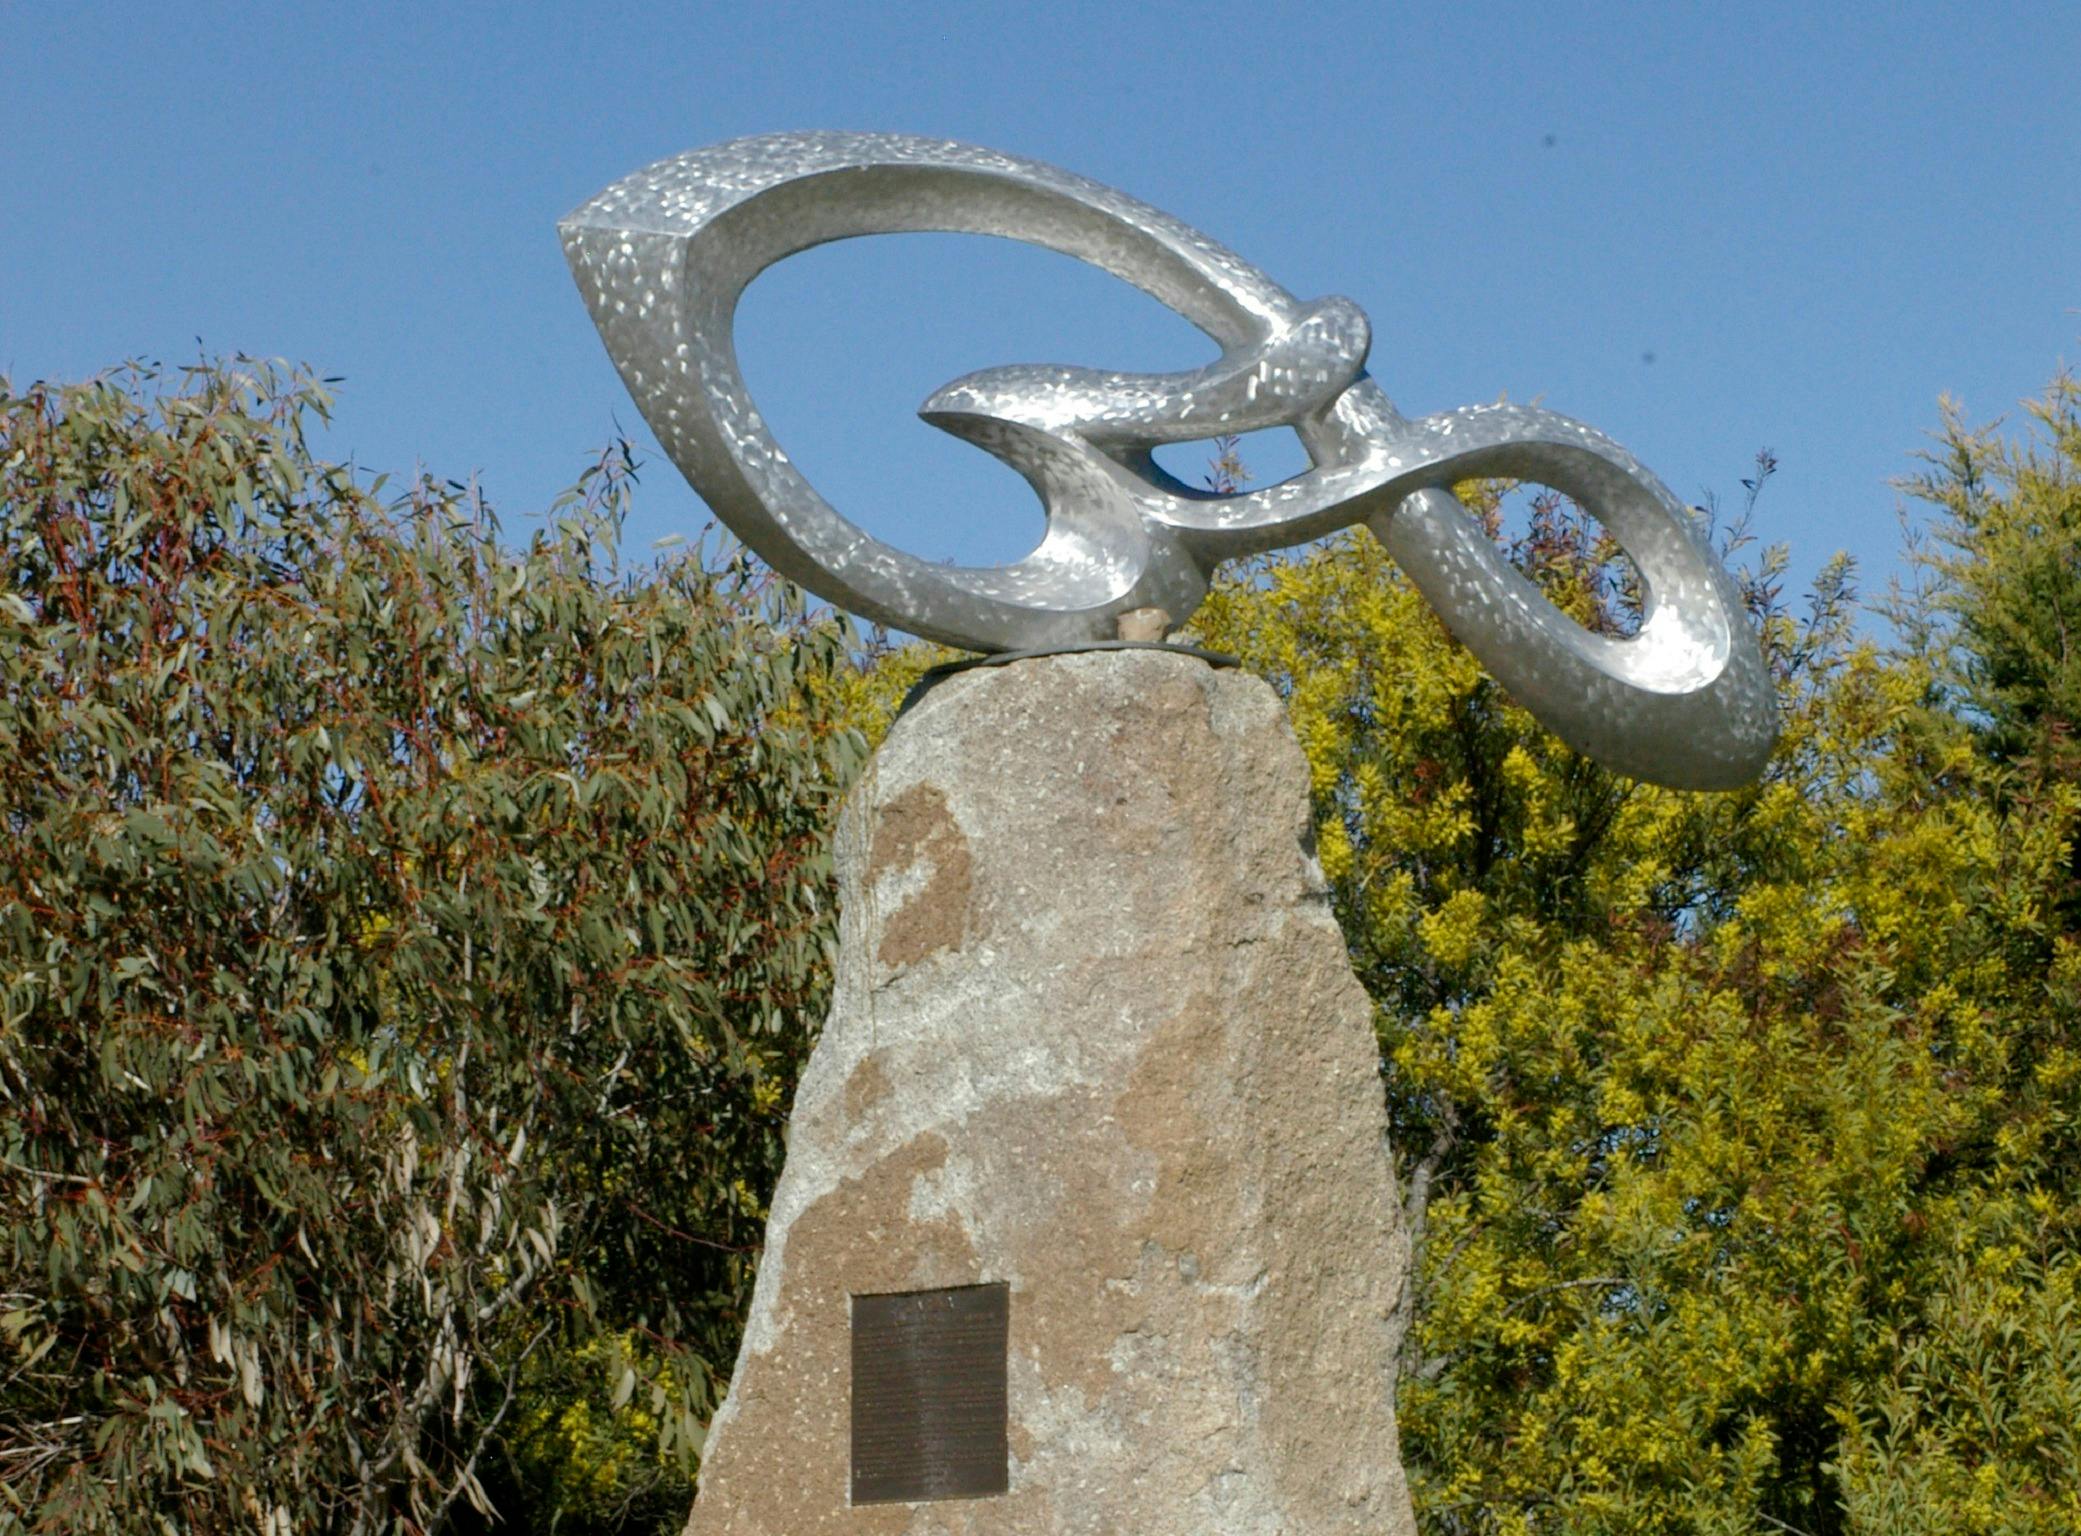 The Glen and Southern Cross Constellation Sculptures